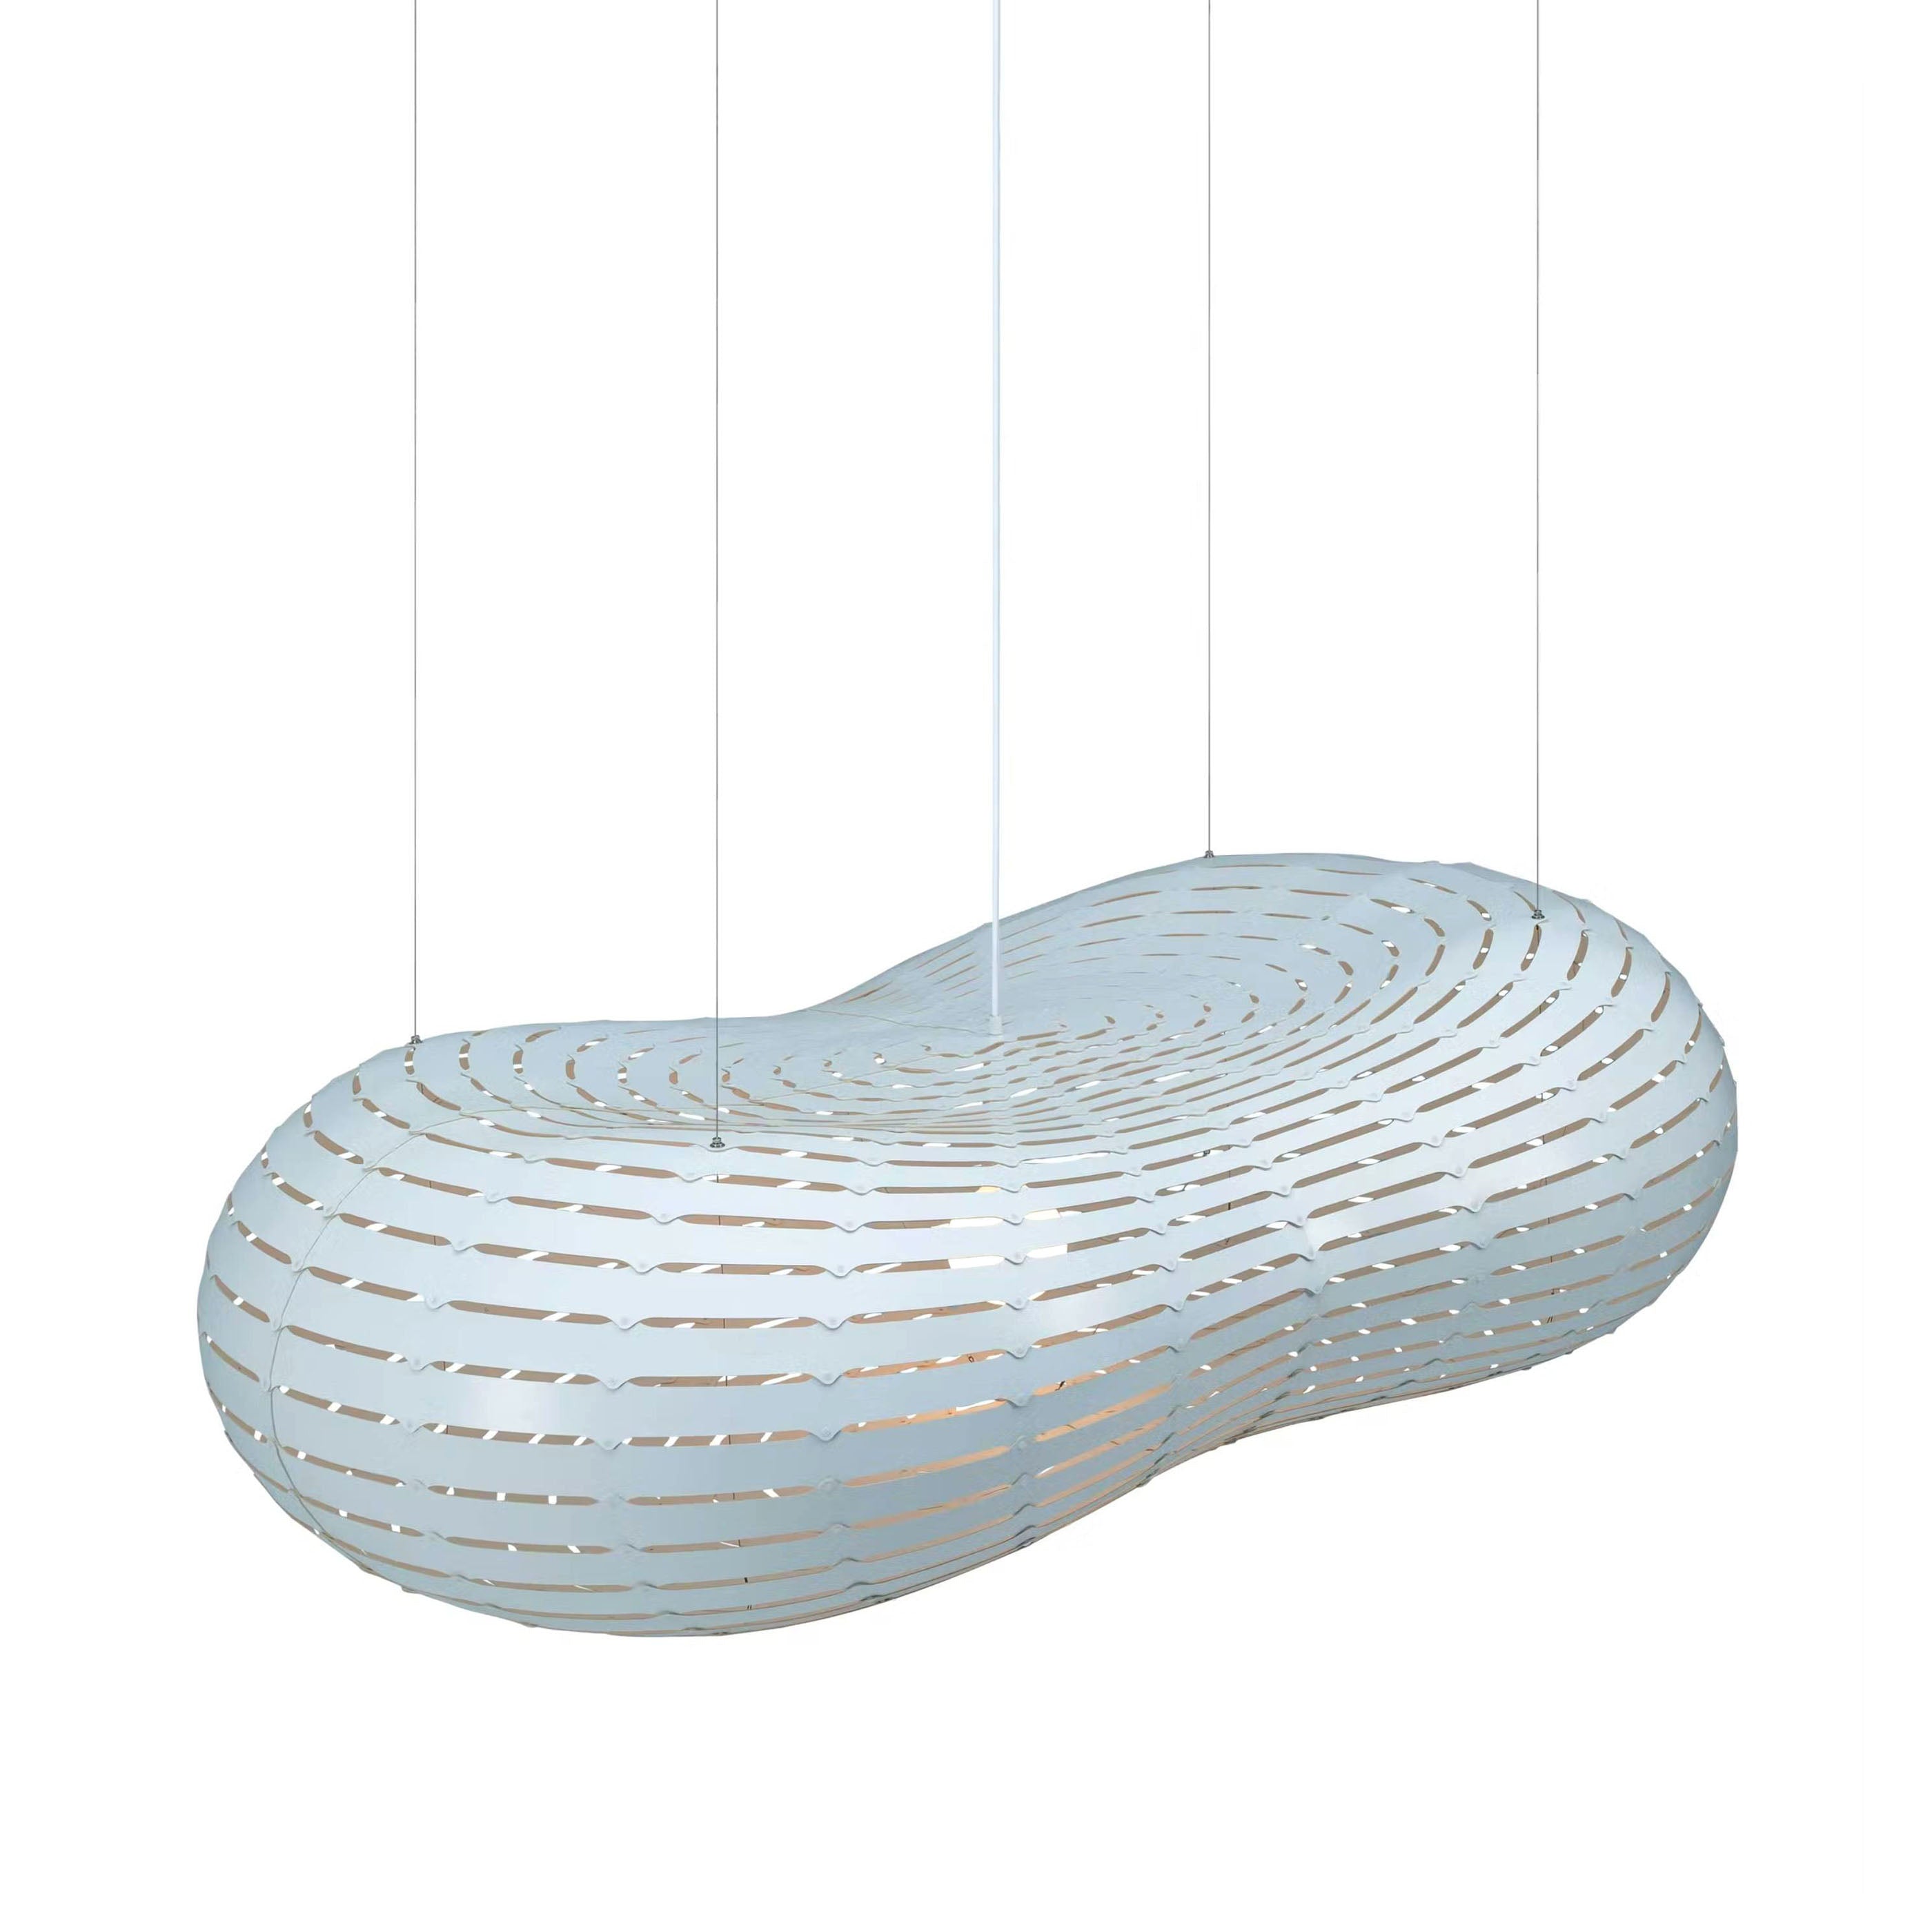 Cloud Suspension Light: Large - 67.6 + Blue + Bamboo + White